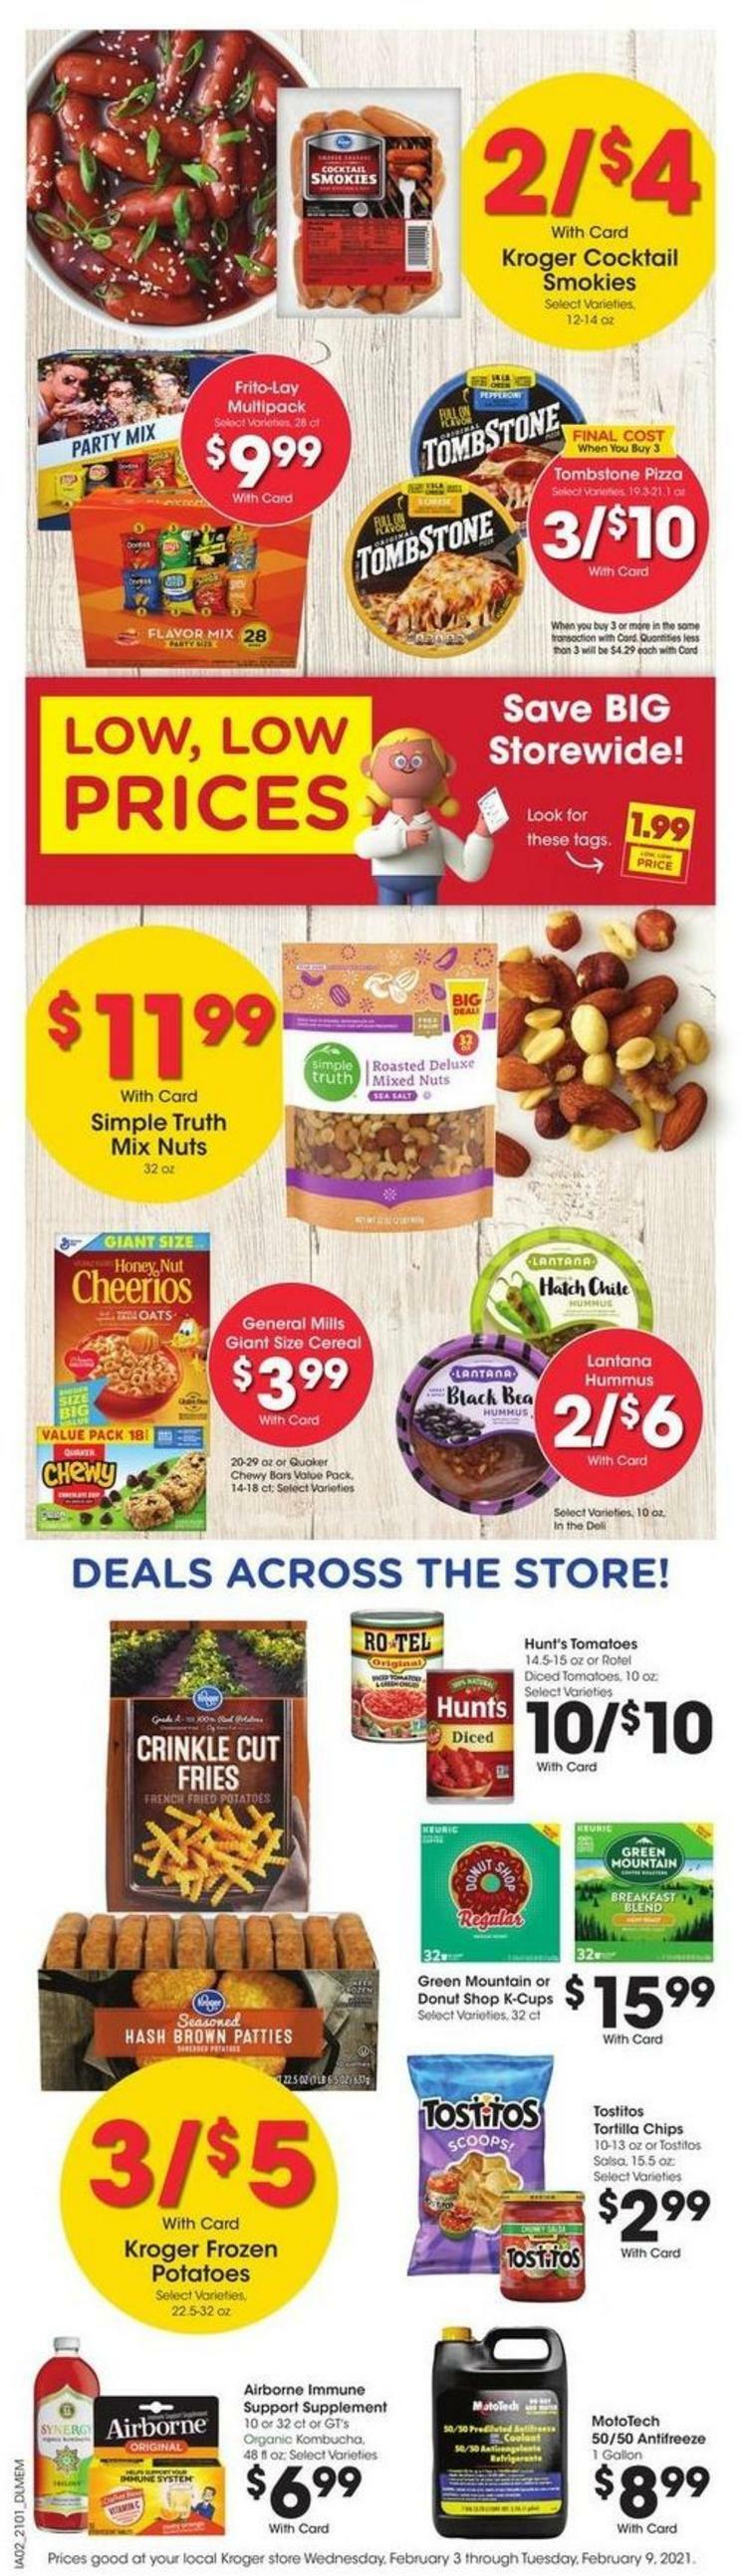 Kroger Weekly Ad from February 3